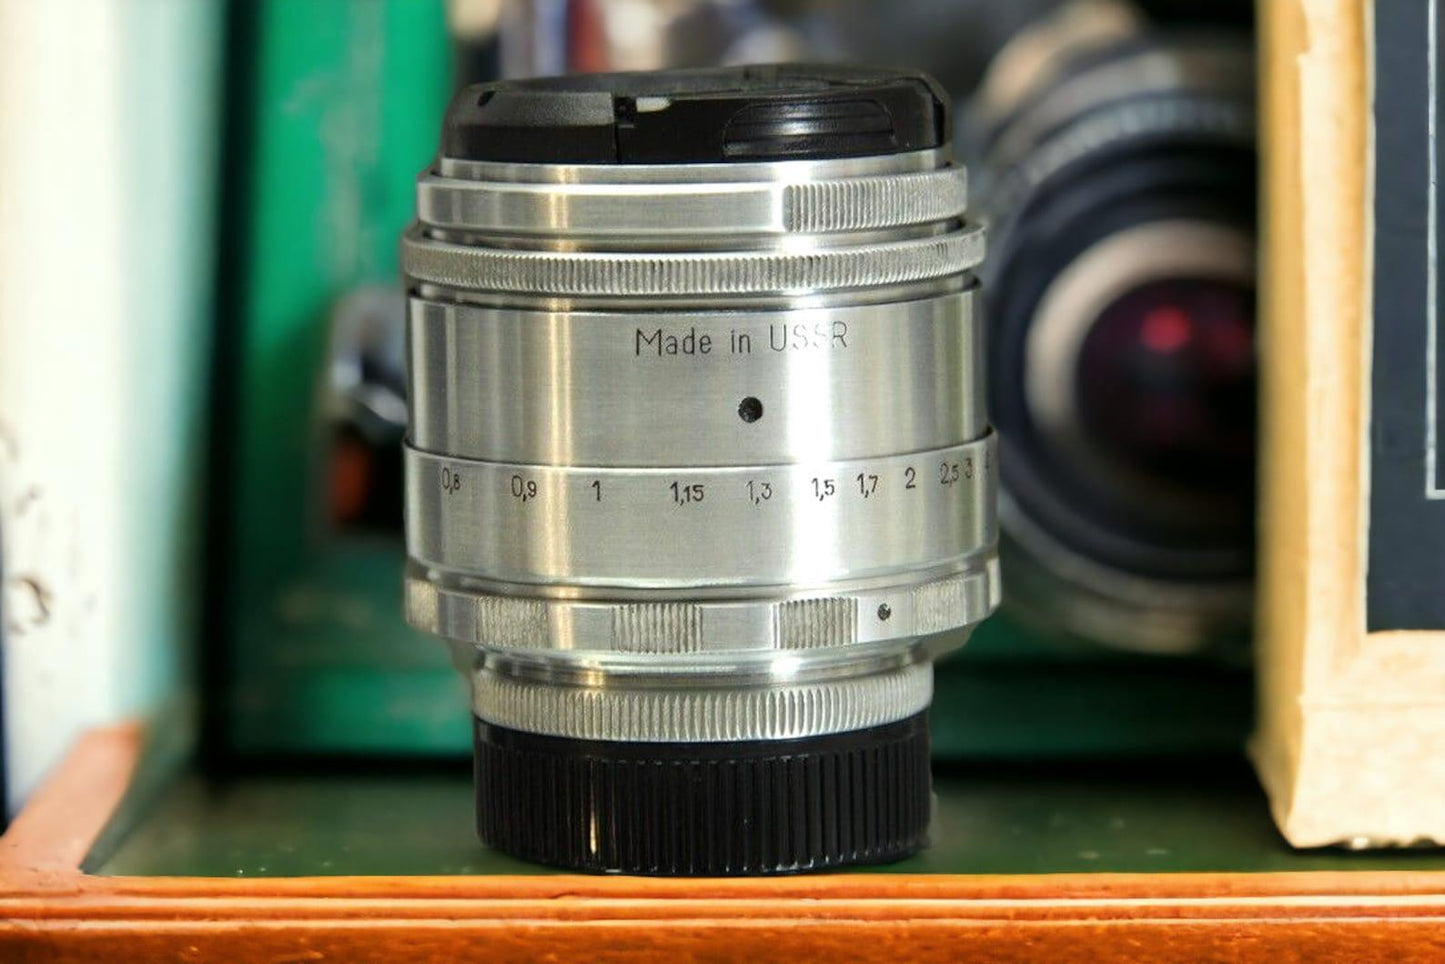 Anamorphic Lens Helios 44-2 58mm Wine Mod Silver with any adaptor on your choice.